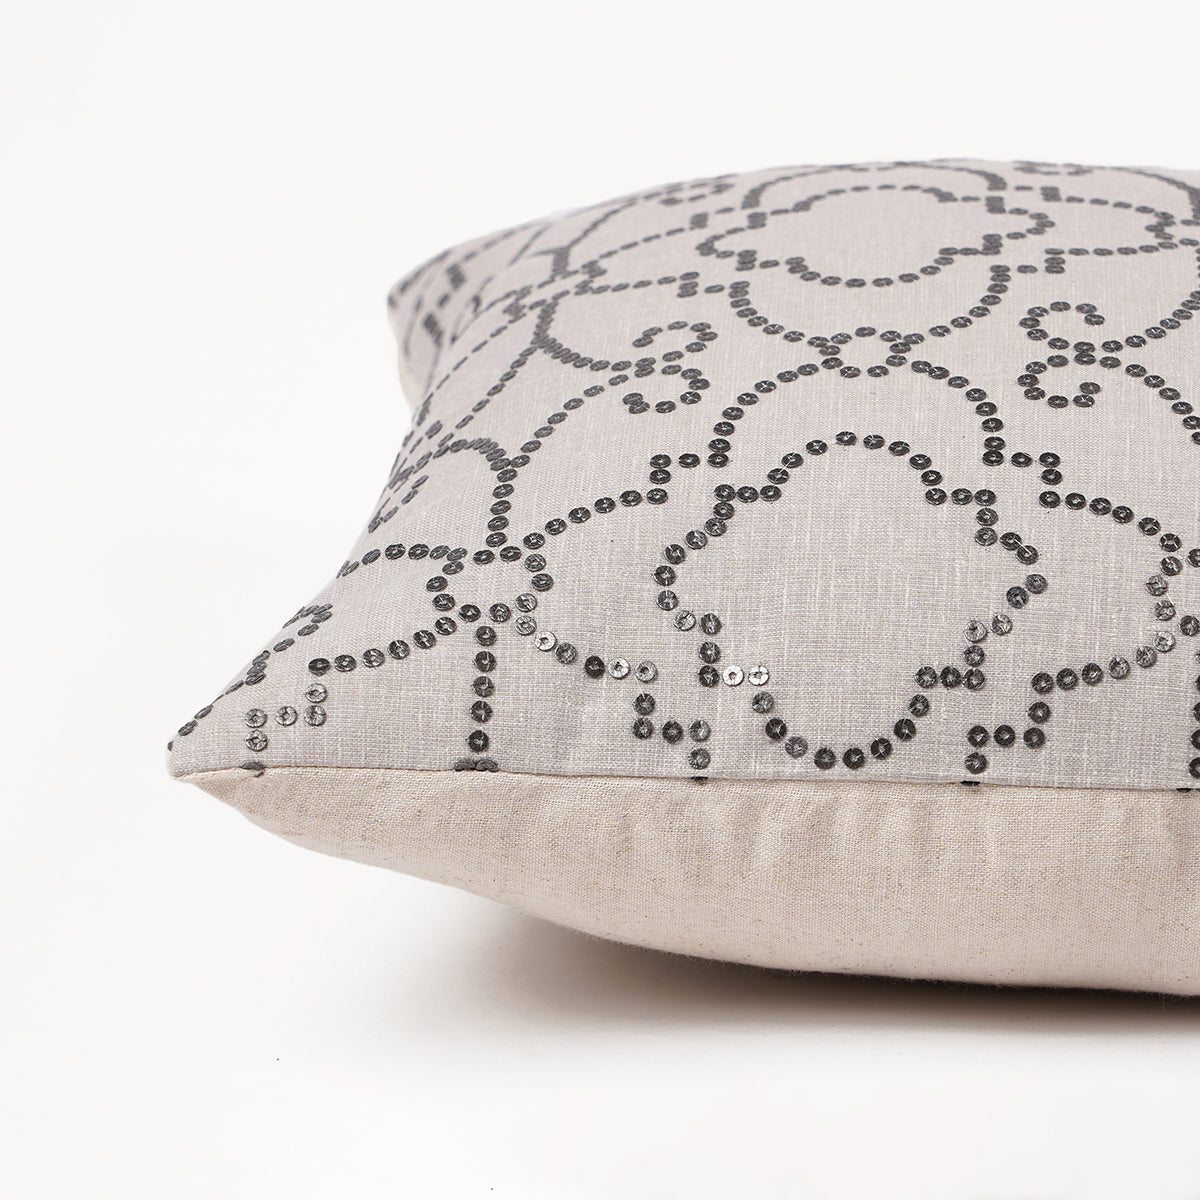 Imperial - Grey sequinned pillow cover, Linen blend fabric, available in 16X16 inches, custom sizes on request